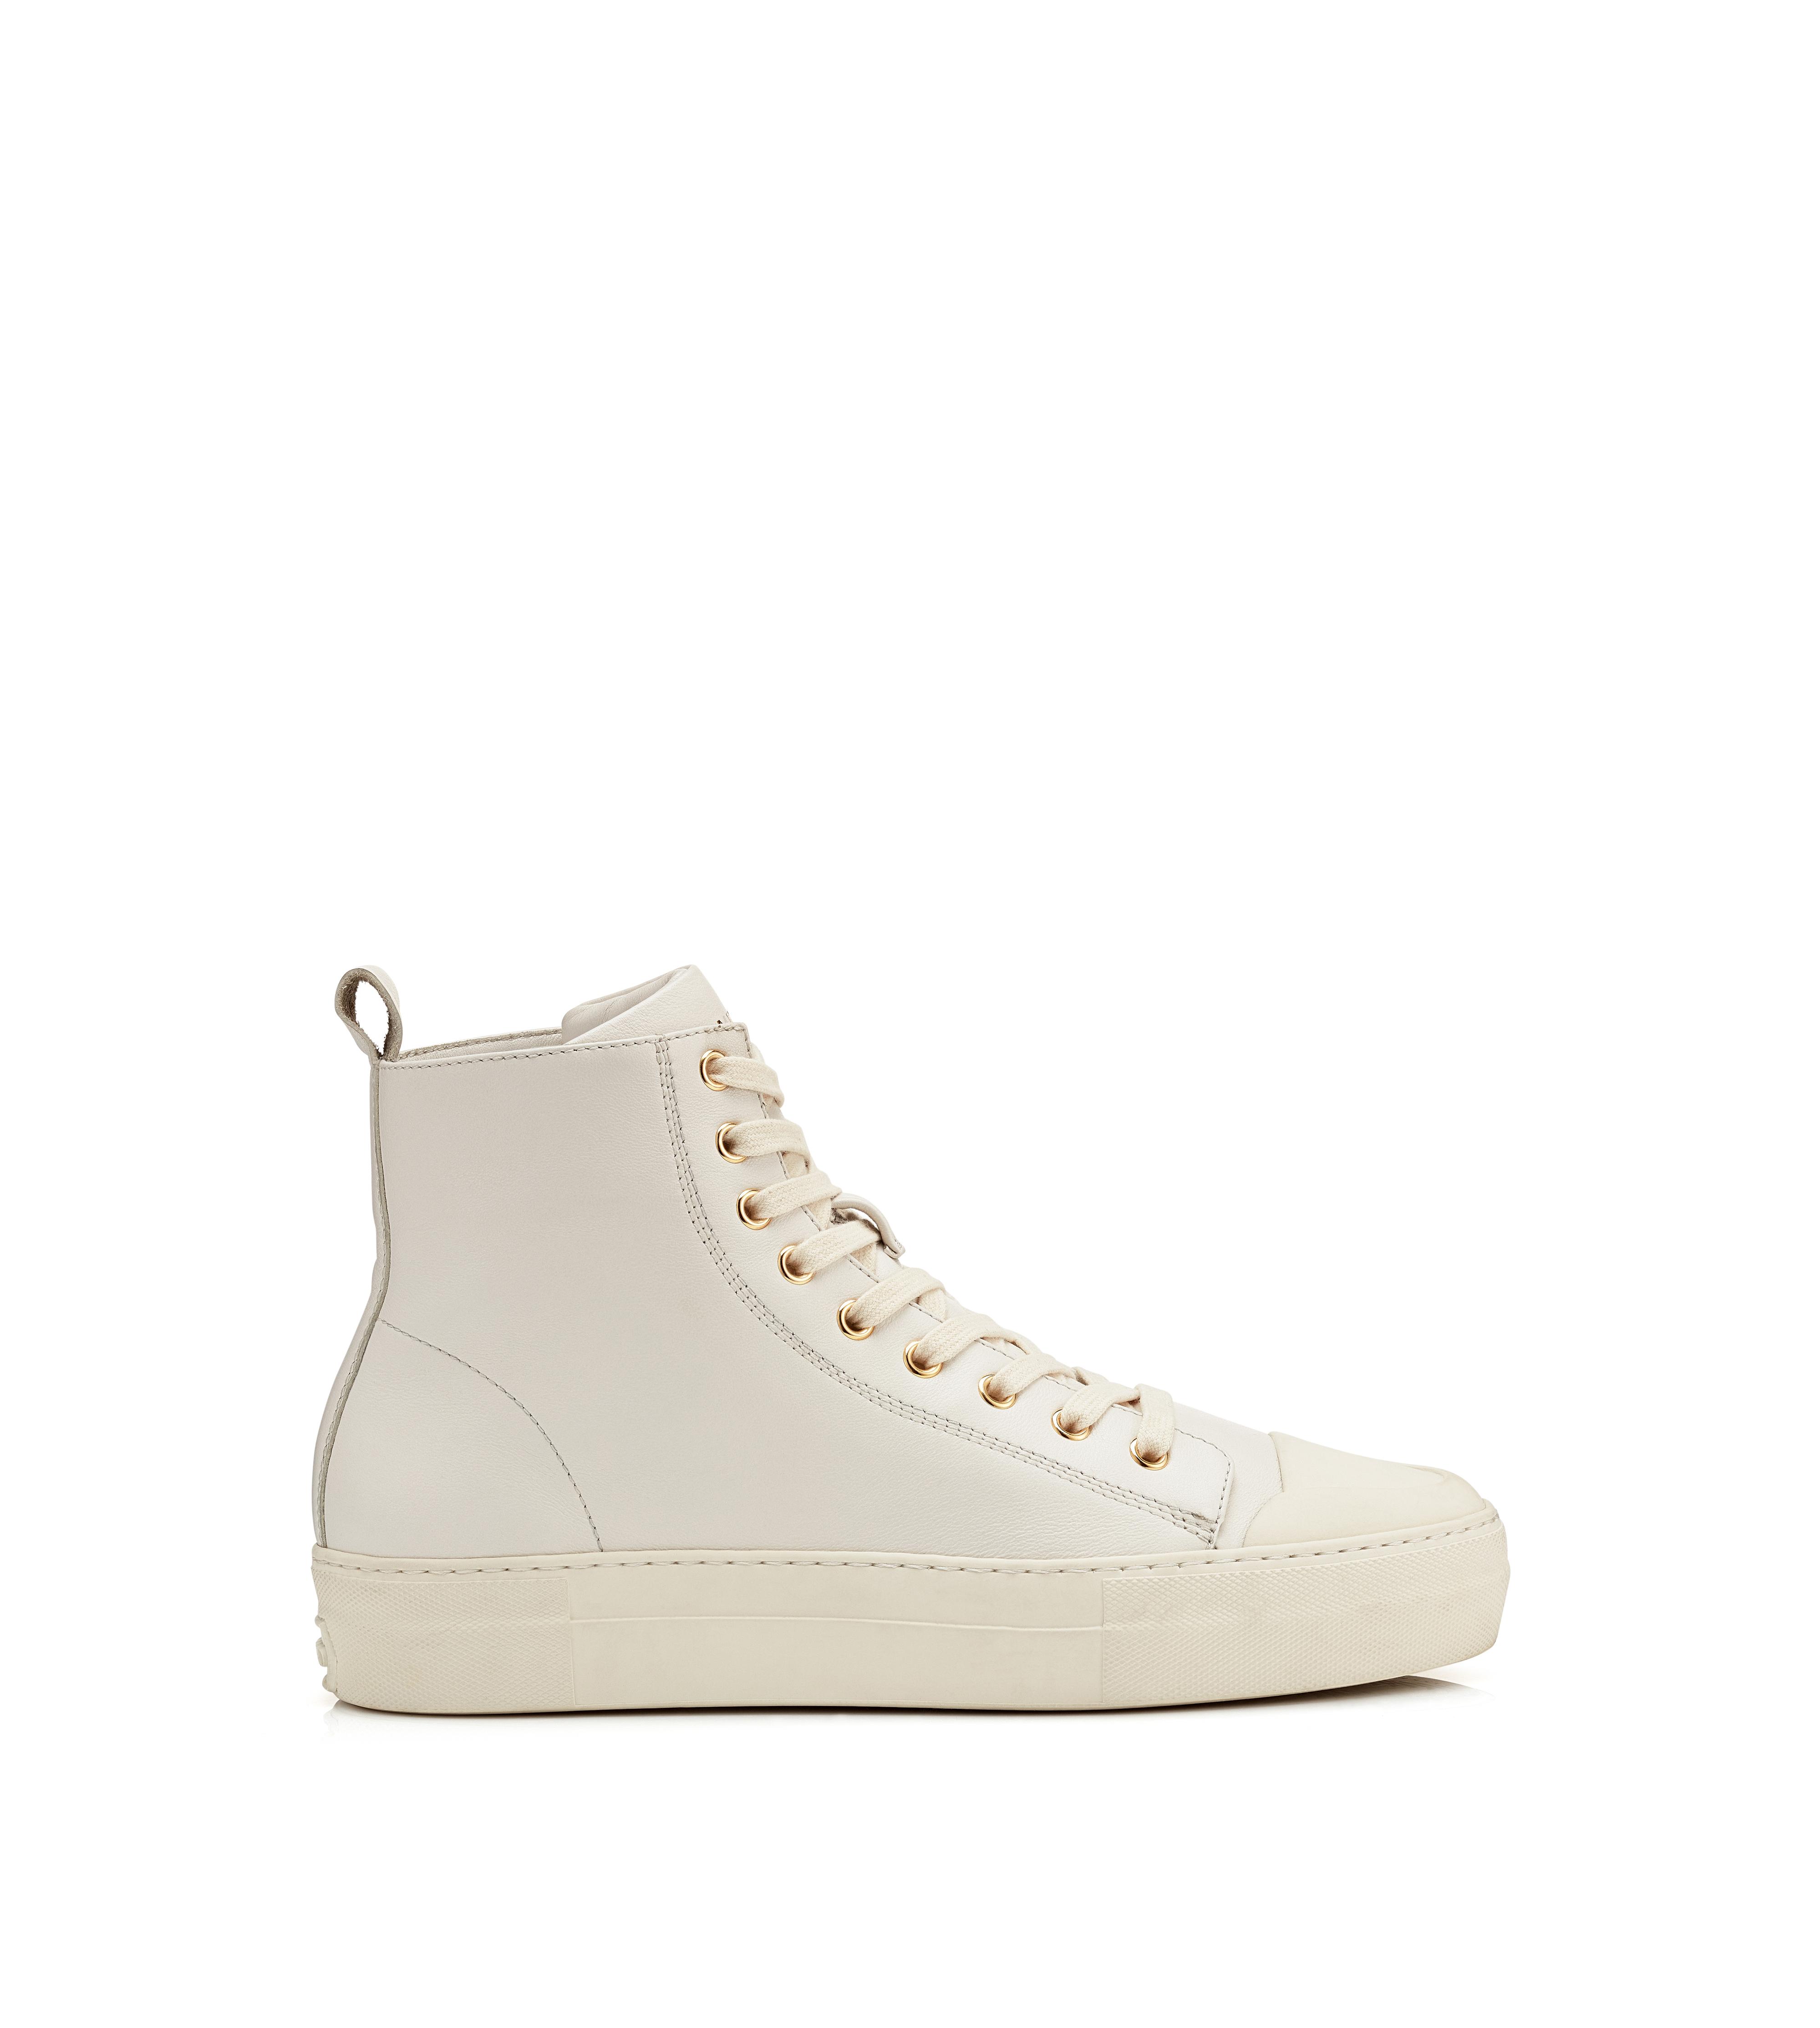 Sneakers - Women's Shoes | TomFord.com